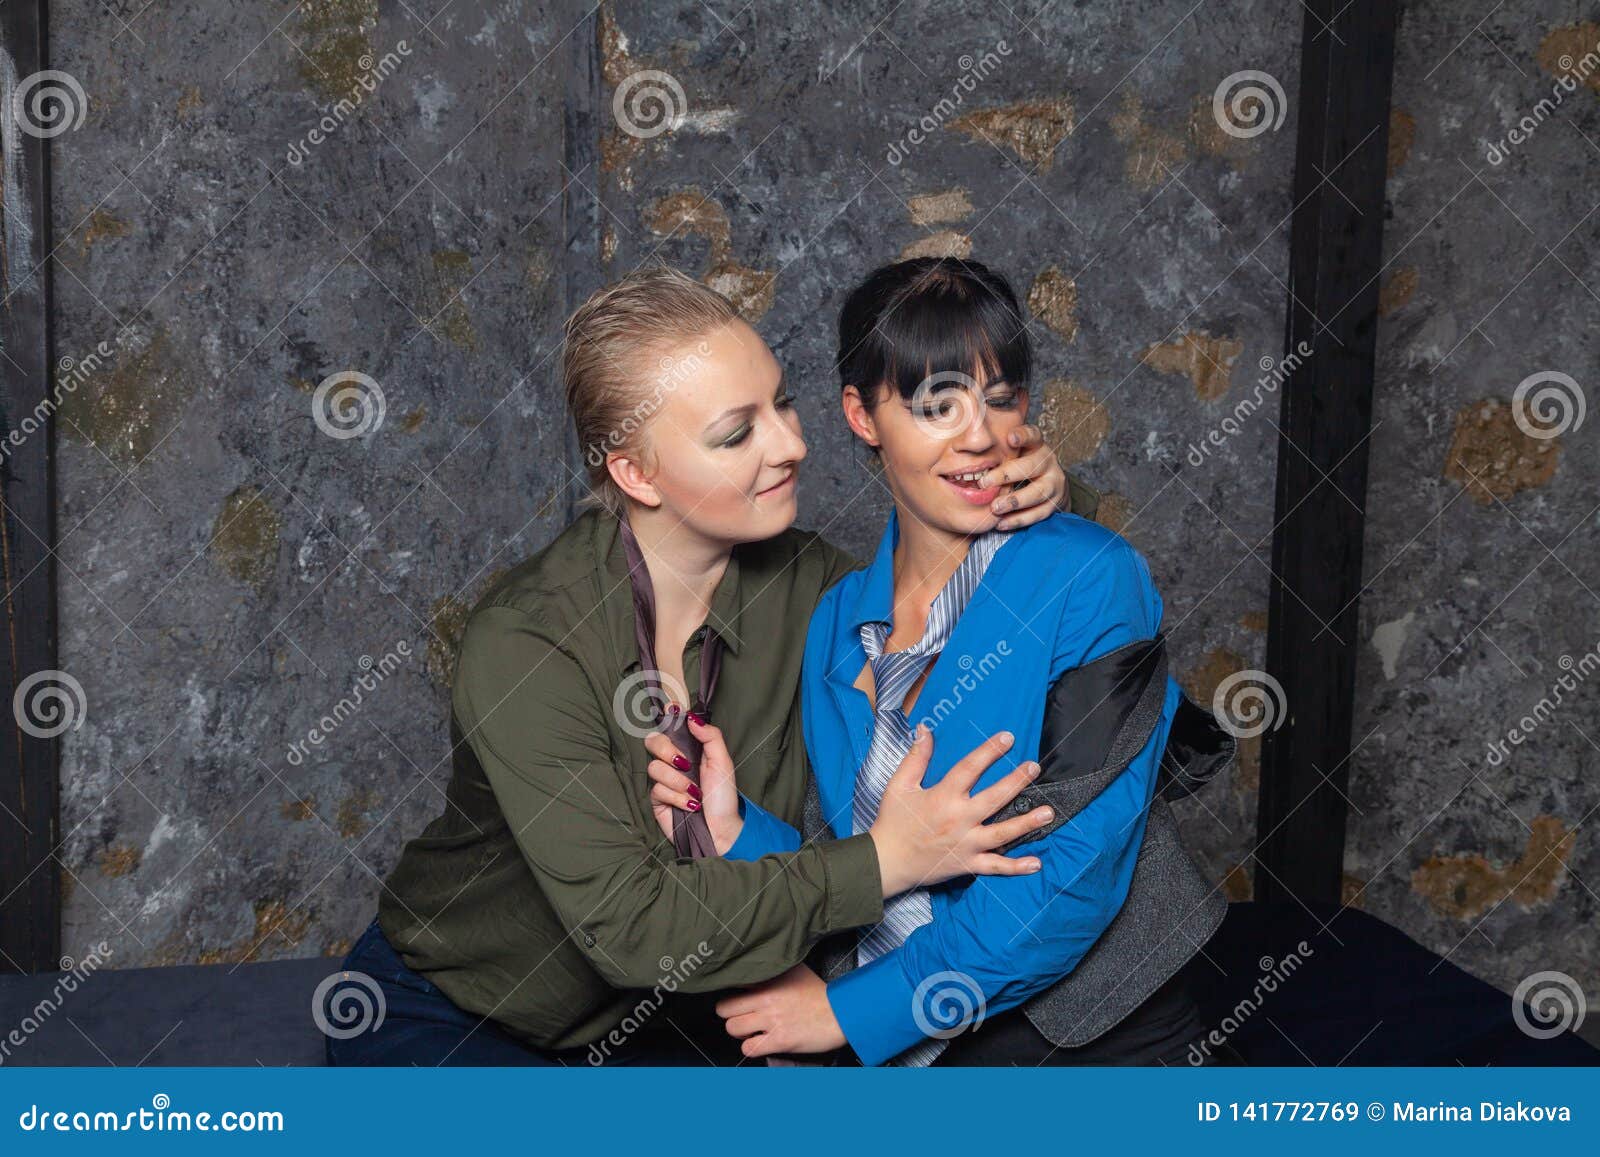 Two Lesbian Girls Making Love On A Black Bed In Their Bedroom Stock Image Image Of Bedroom